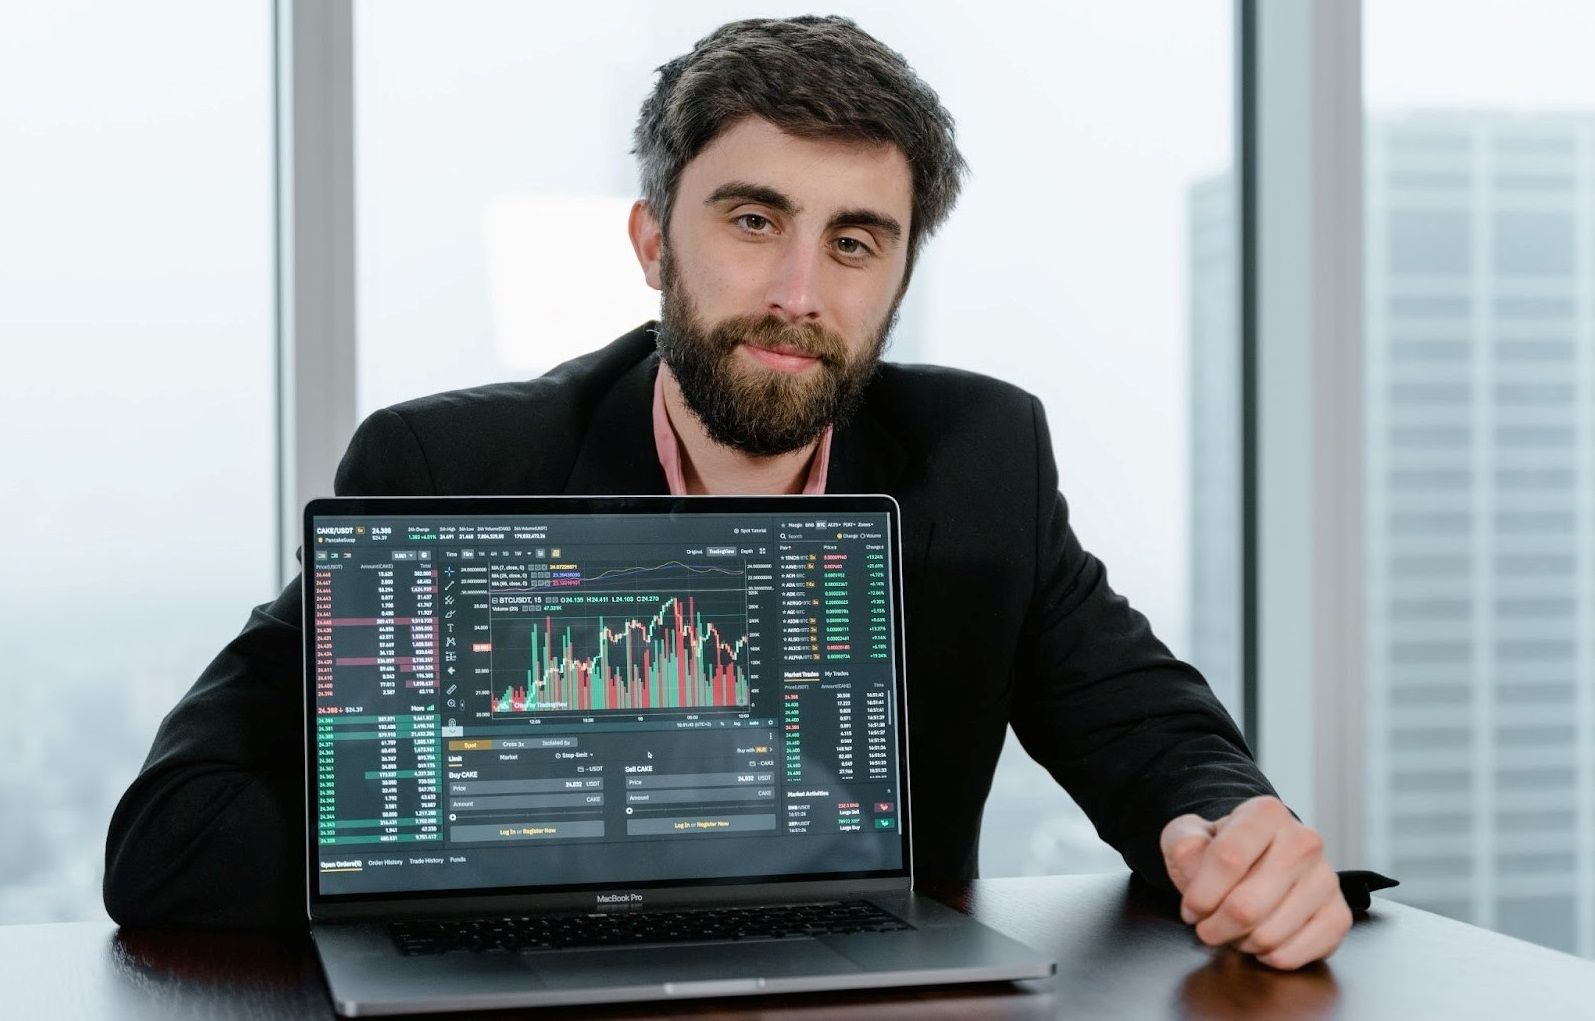 A man sits behind a laptop screen showing a crypto price chart